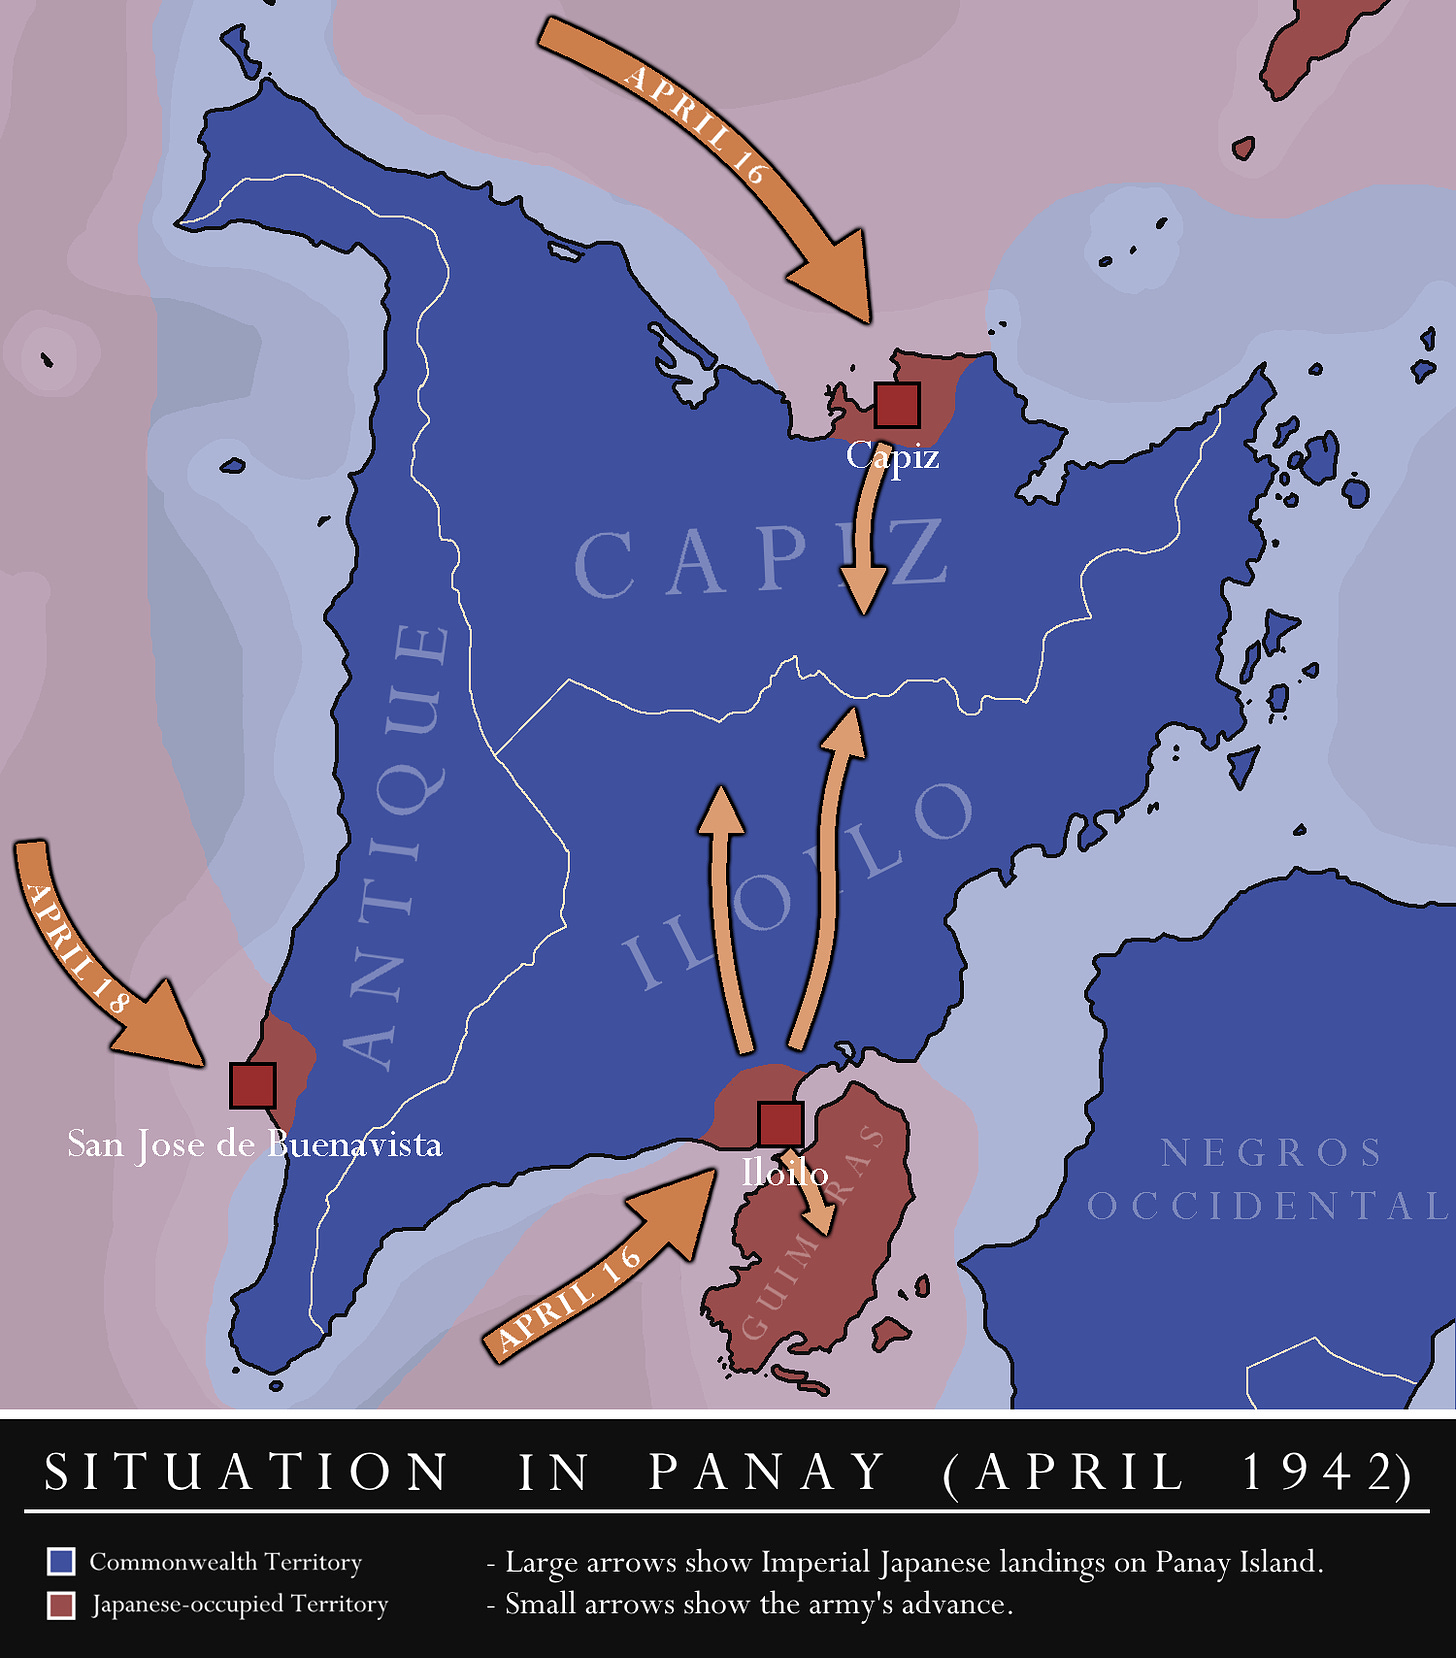 File:Situation in Panay April 1942.png - Wikimedia Commons